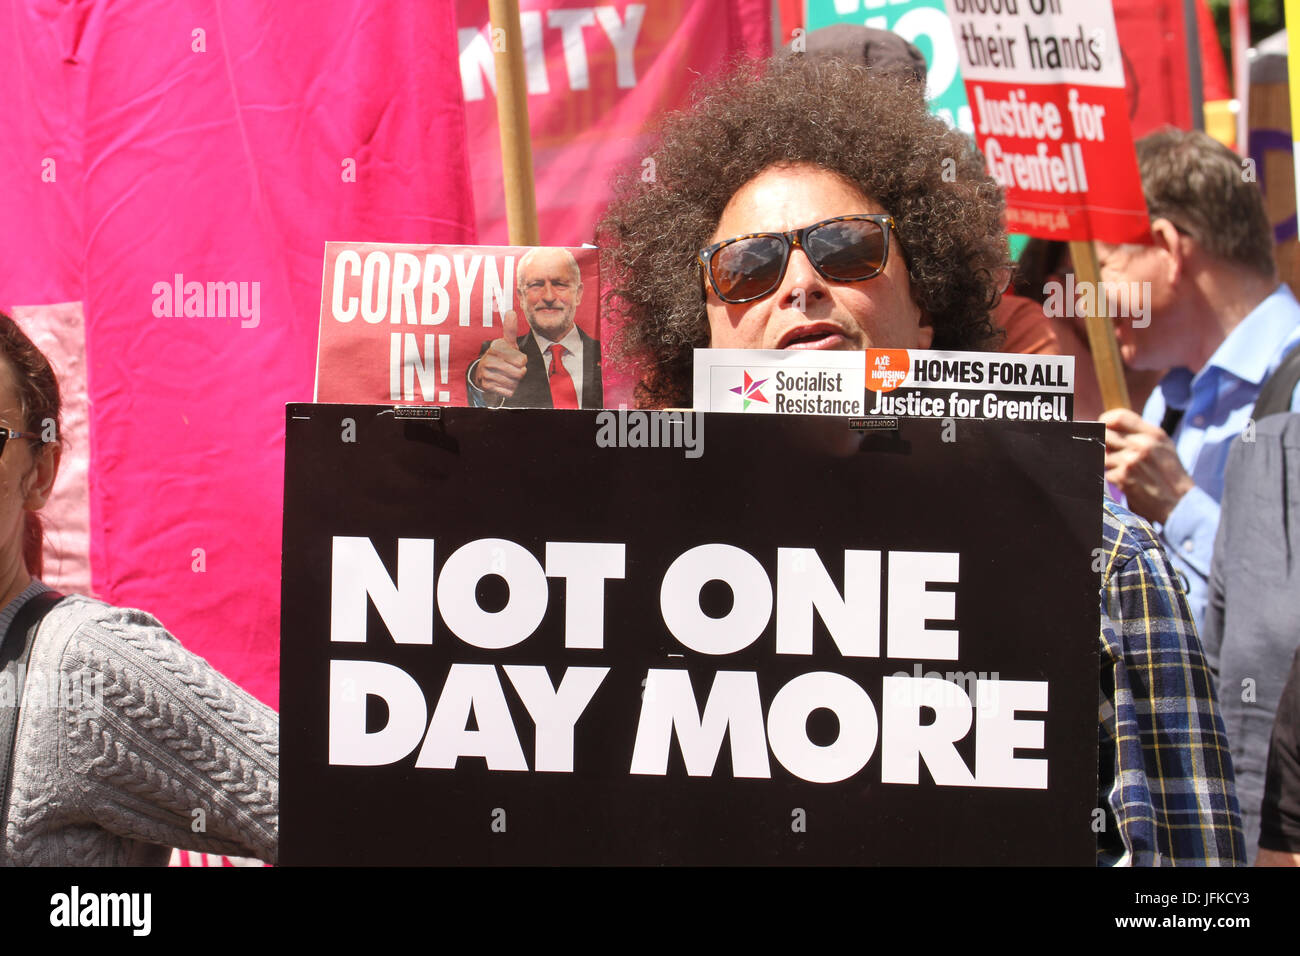 London, UK - 1 July 2017 - A demonstrator hold up a placard witht eh words 'Not One Day More' during the national demonstration demanding for an end of the Tory government on 1 July.The demo began at Portland Place with demonstrators marching to Parliament Square for a rally. Credit: David Mbiyu/Alamy Live News Stock Photo